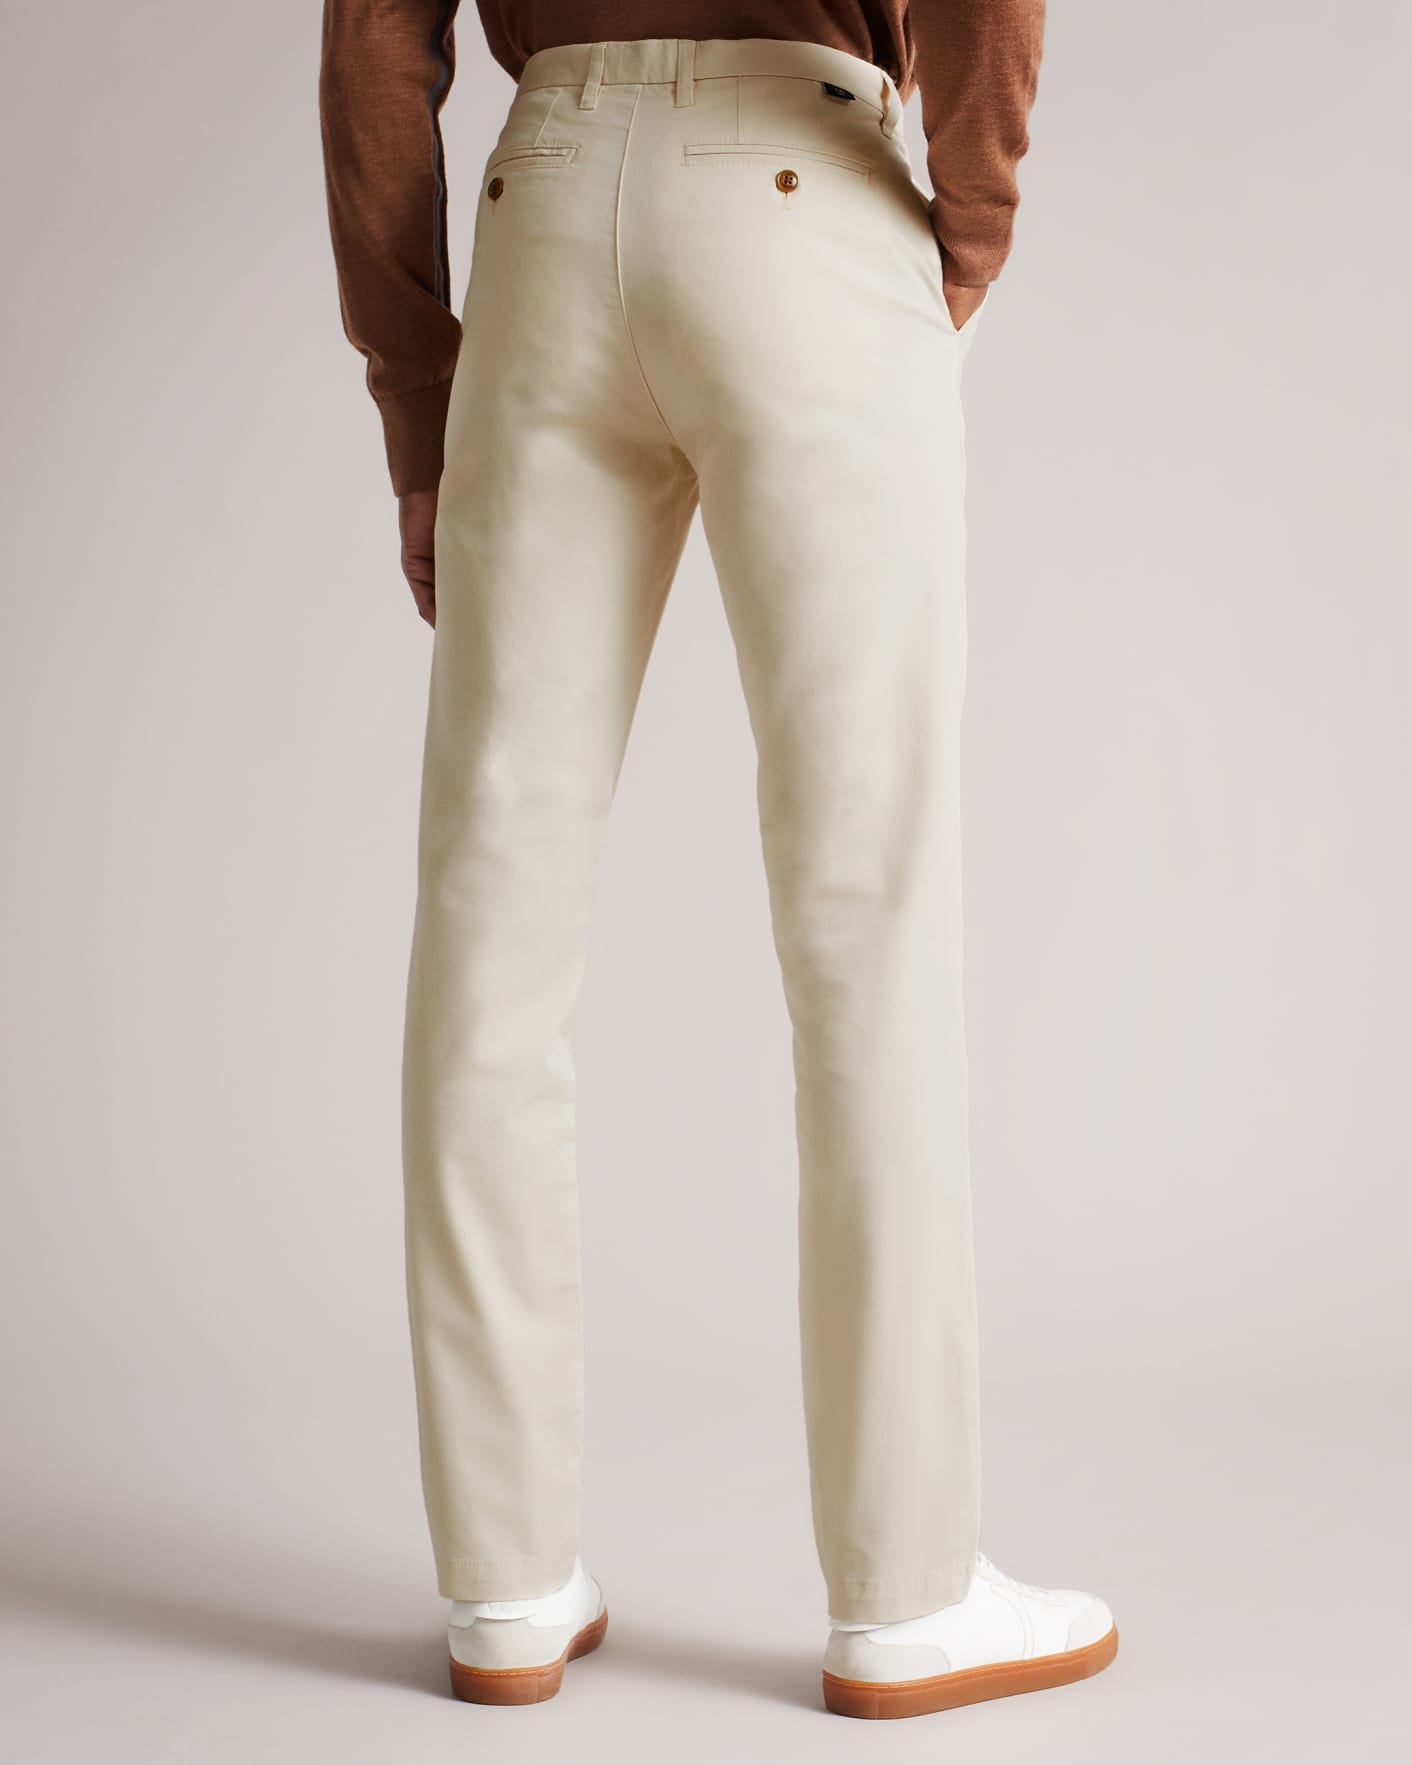 Blanco Chino Slim Fit Ted Baker